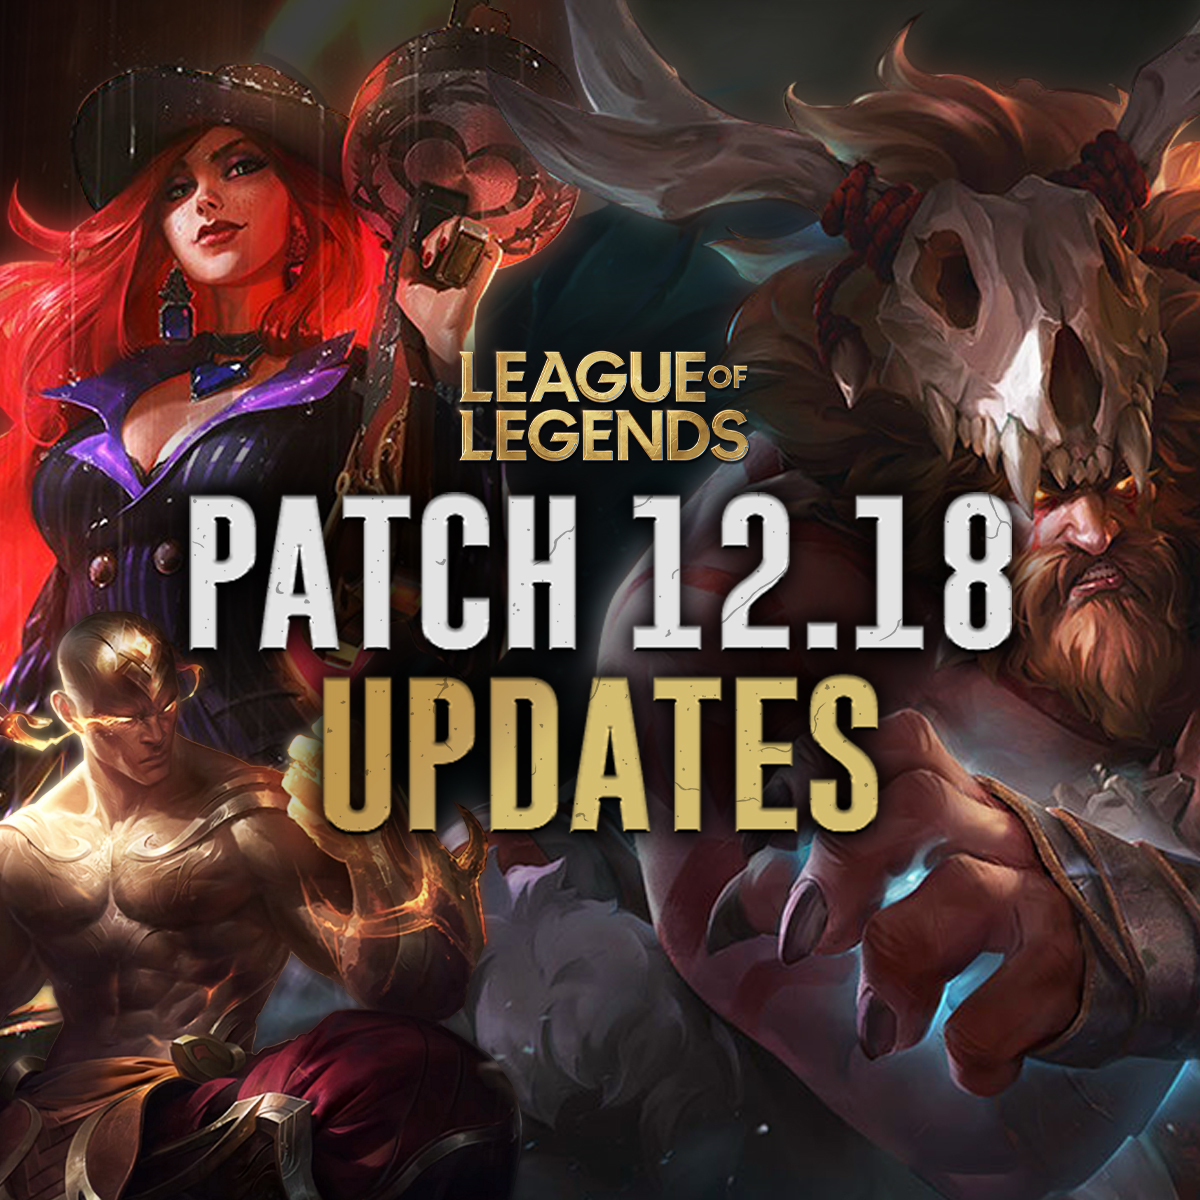 Patch 12.18 notes